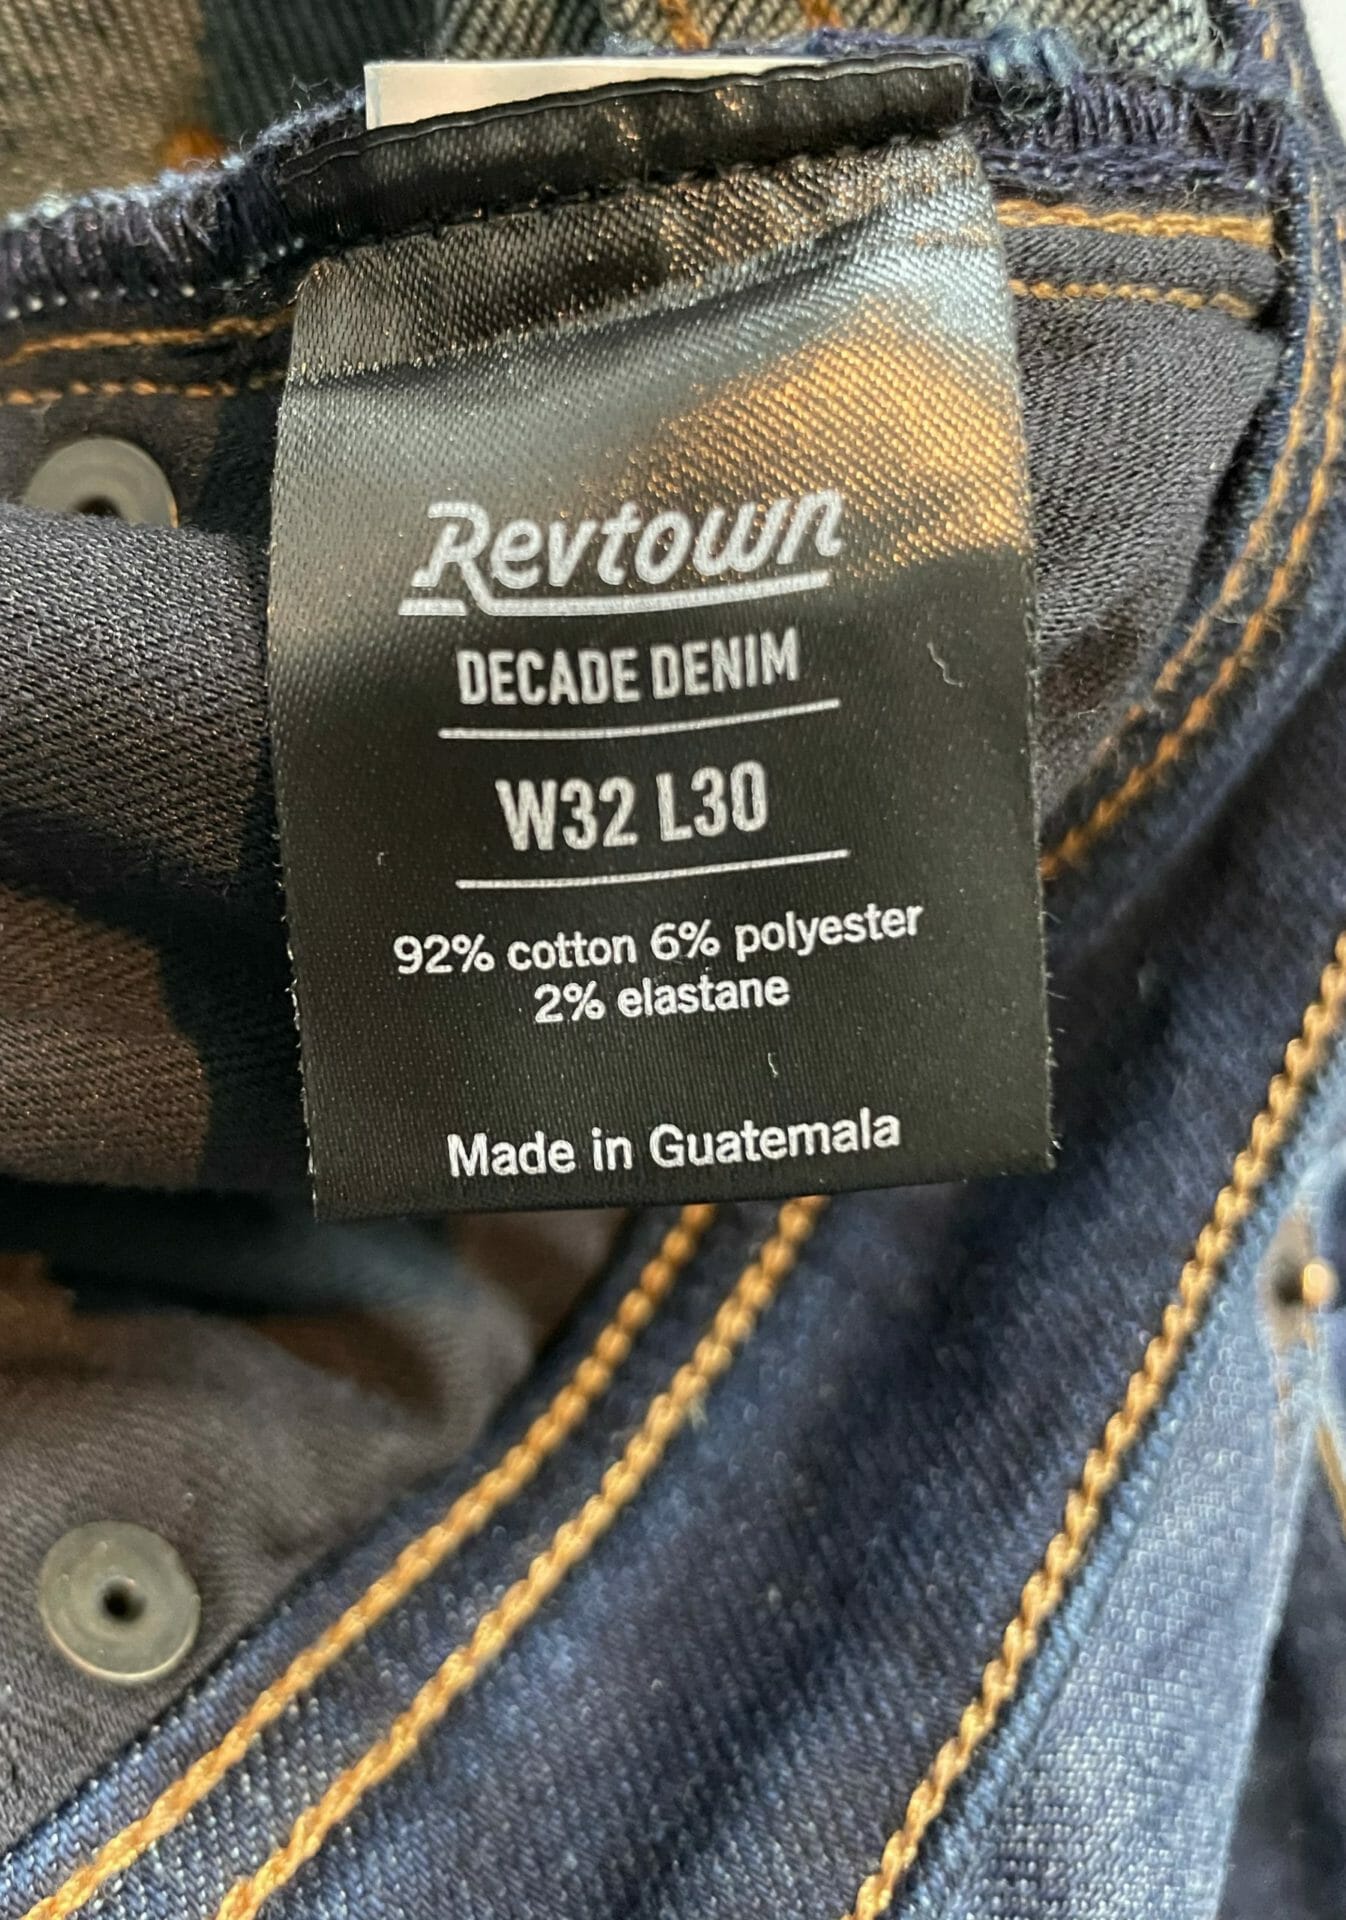 Revtown Jeans Review: Are They The Ultimate Holy Grail Of Jeans?